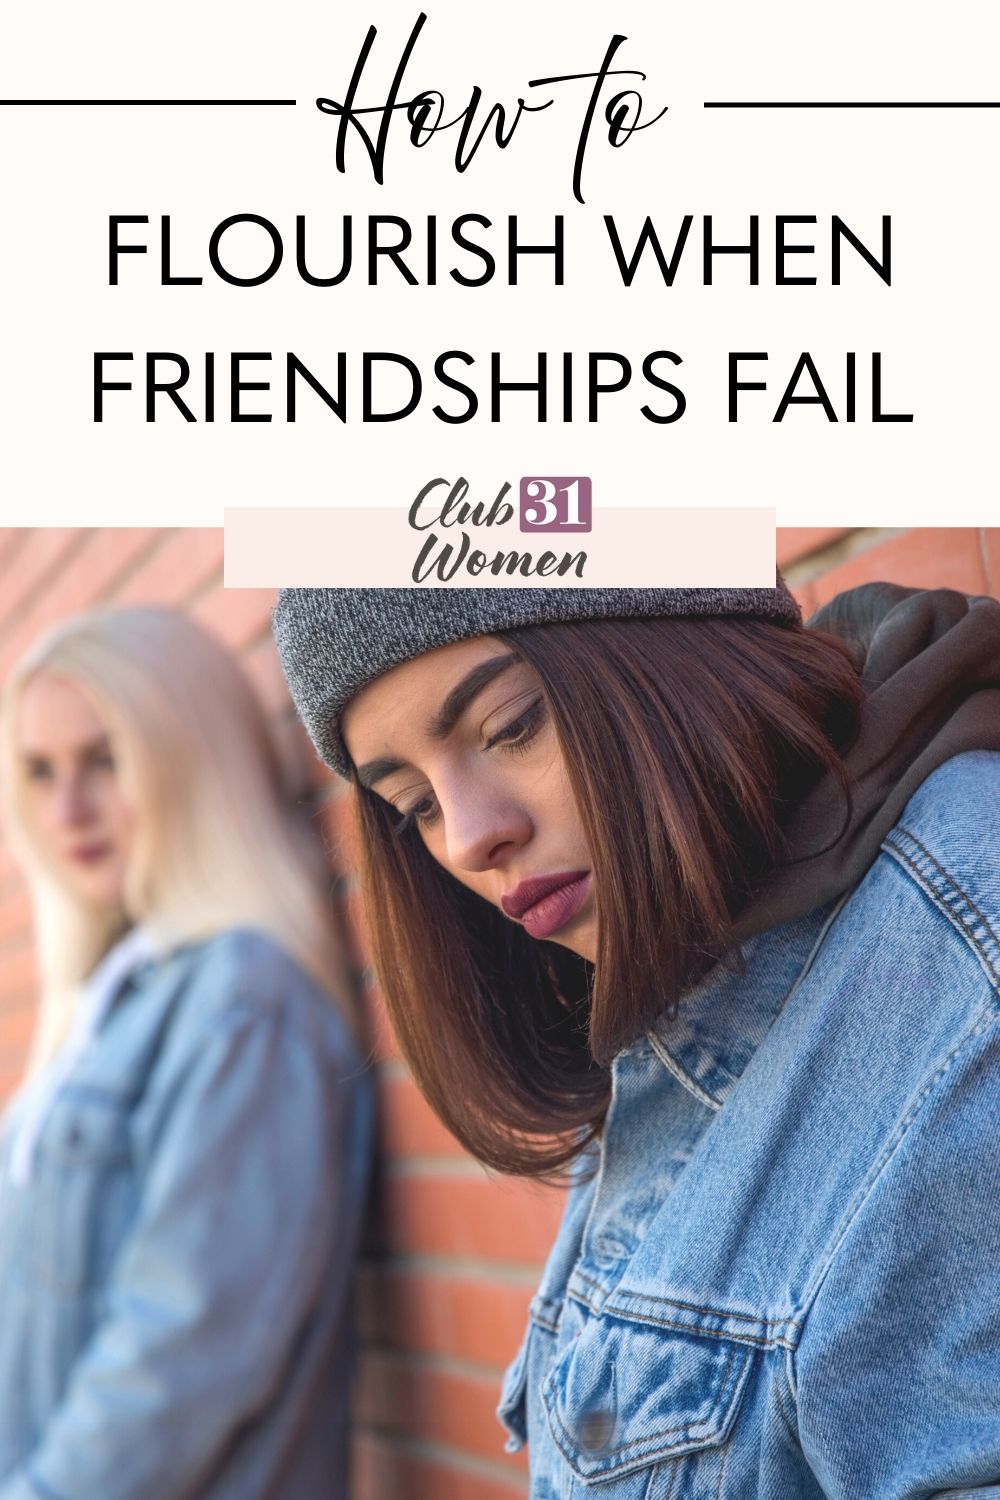 Friendships come and go and it can be hard to cope with those loses. How can we be satisfied through our deepest aches? via @Club31Women